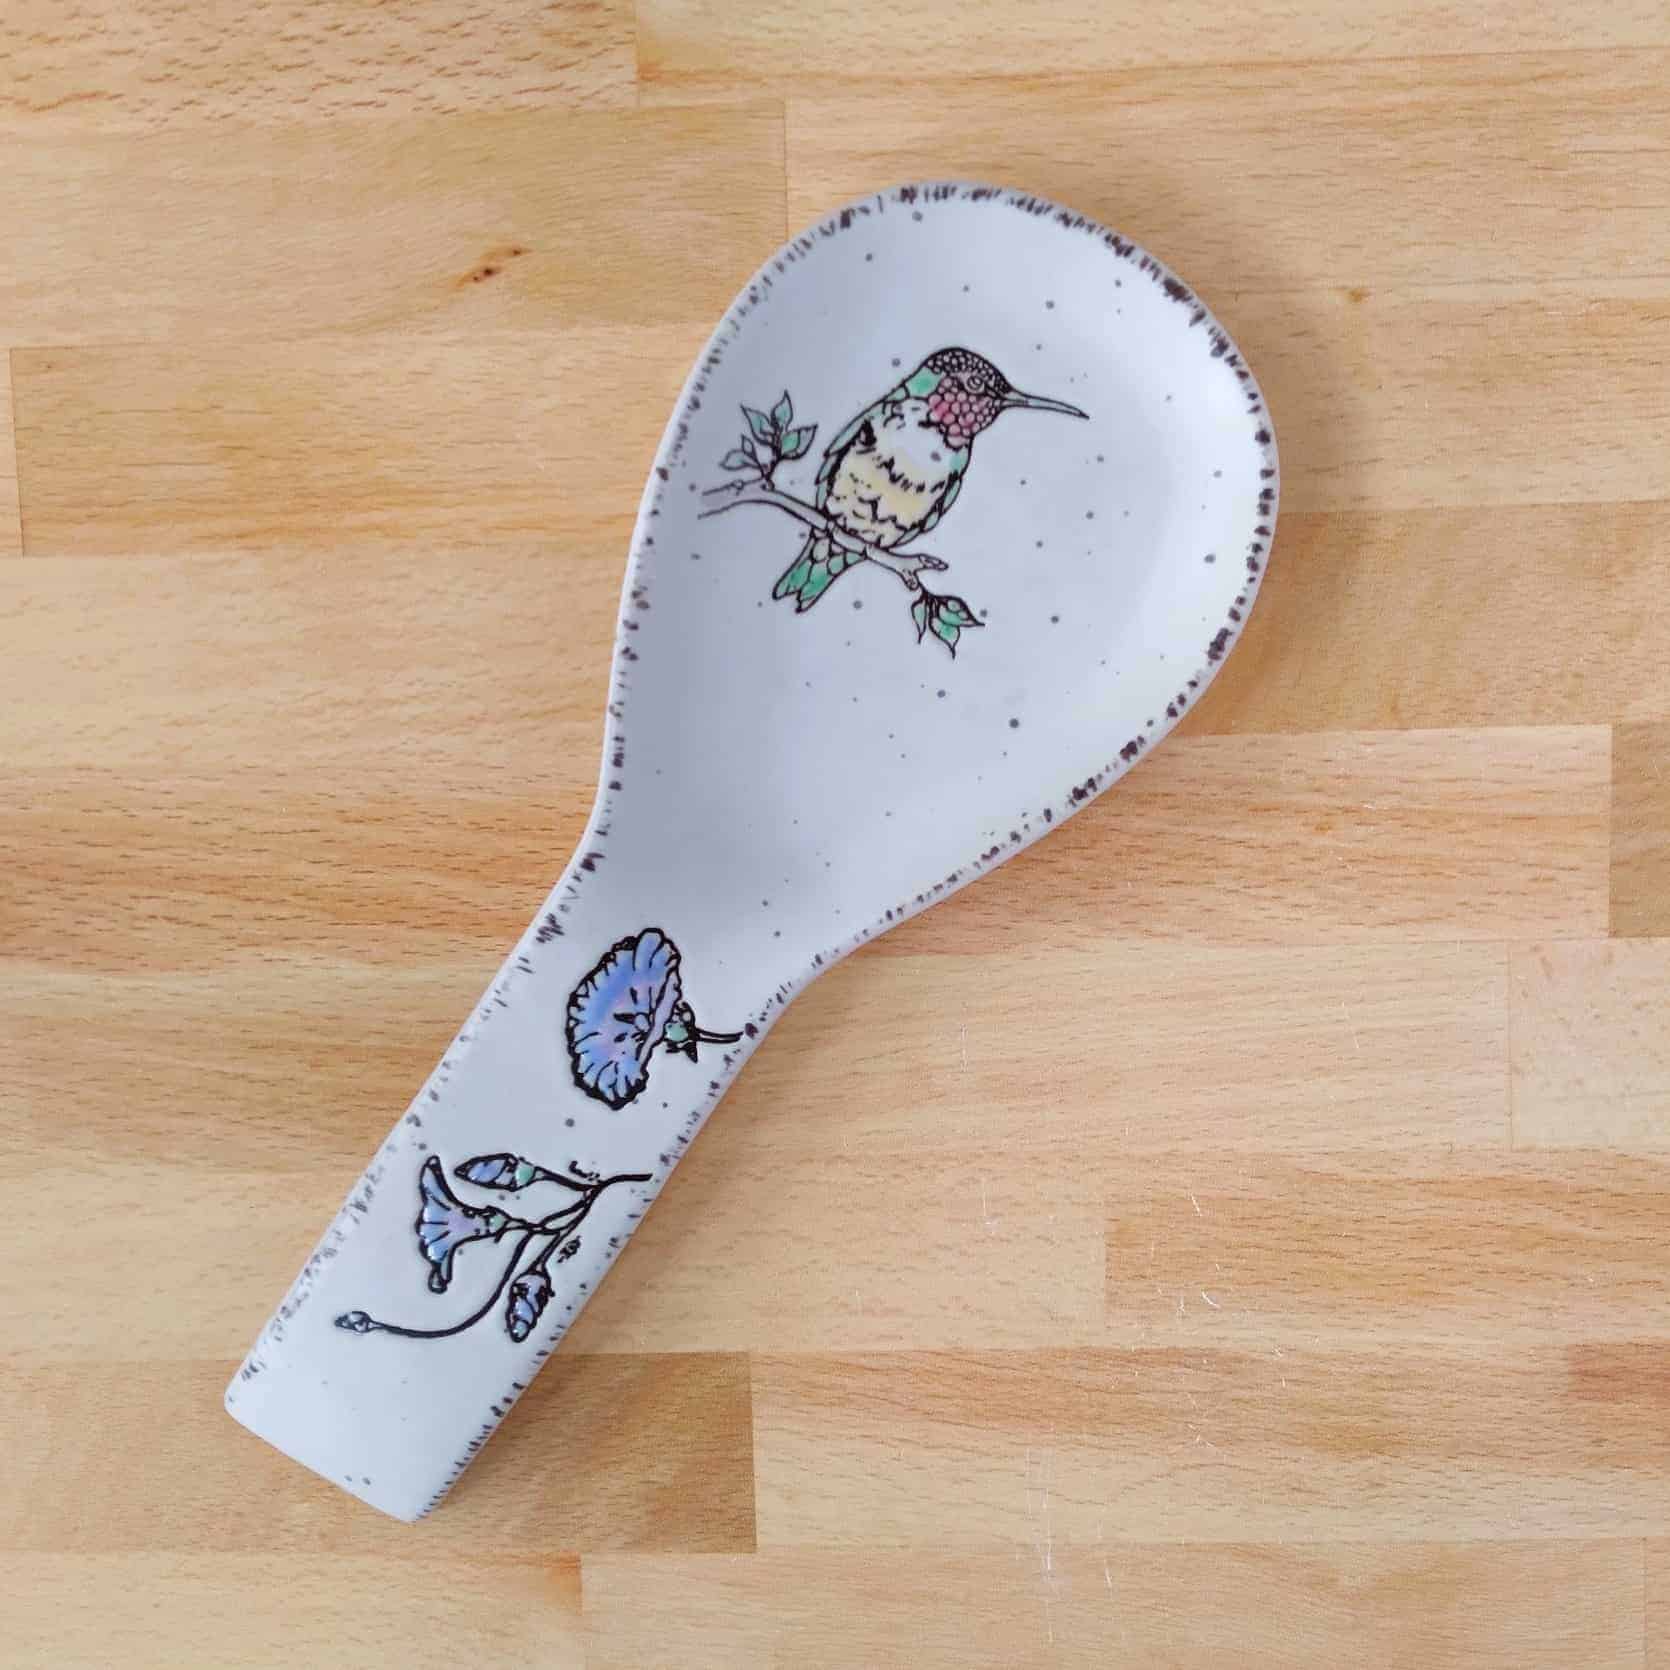 This Hummingbird Spoon Rest Ceramic by Blue Sky is made with love by Premier Homegoods! Shop more unique gift ideas today with Spots Initiatives, the best way to support creators.